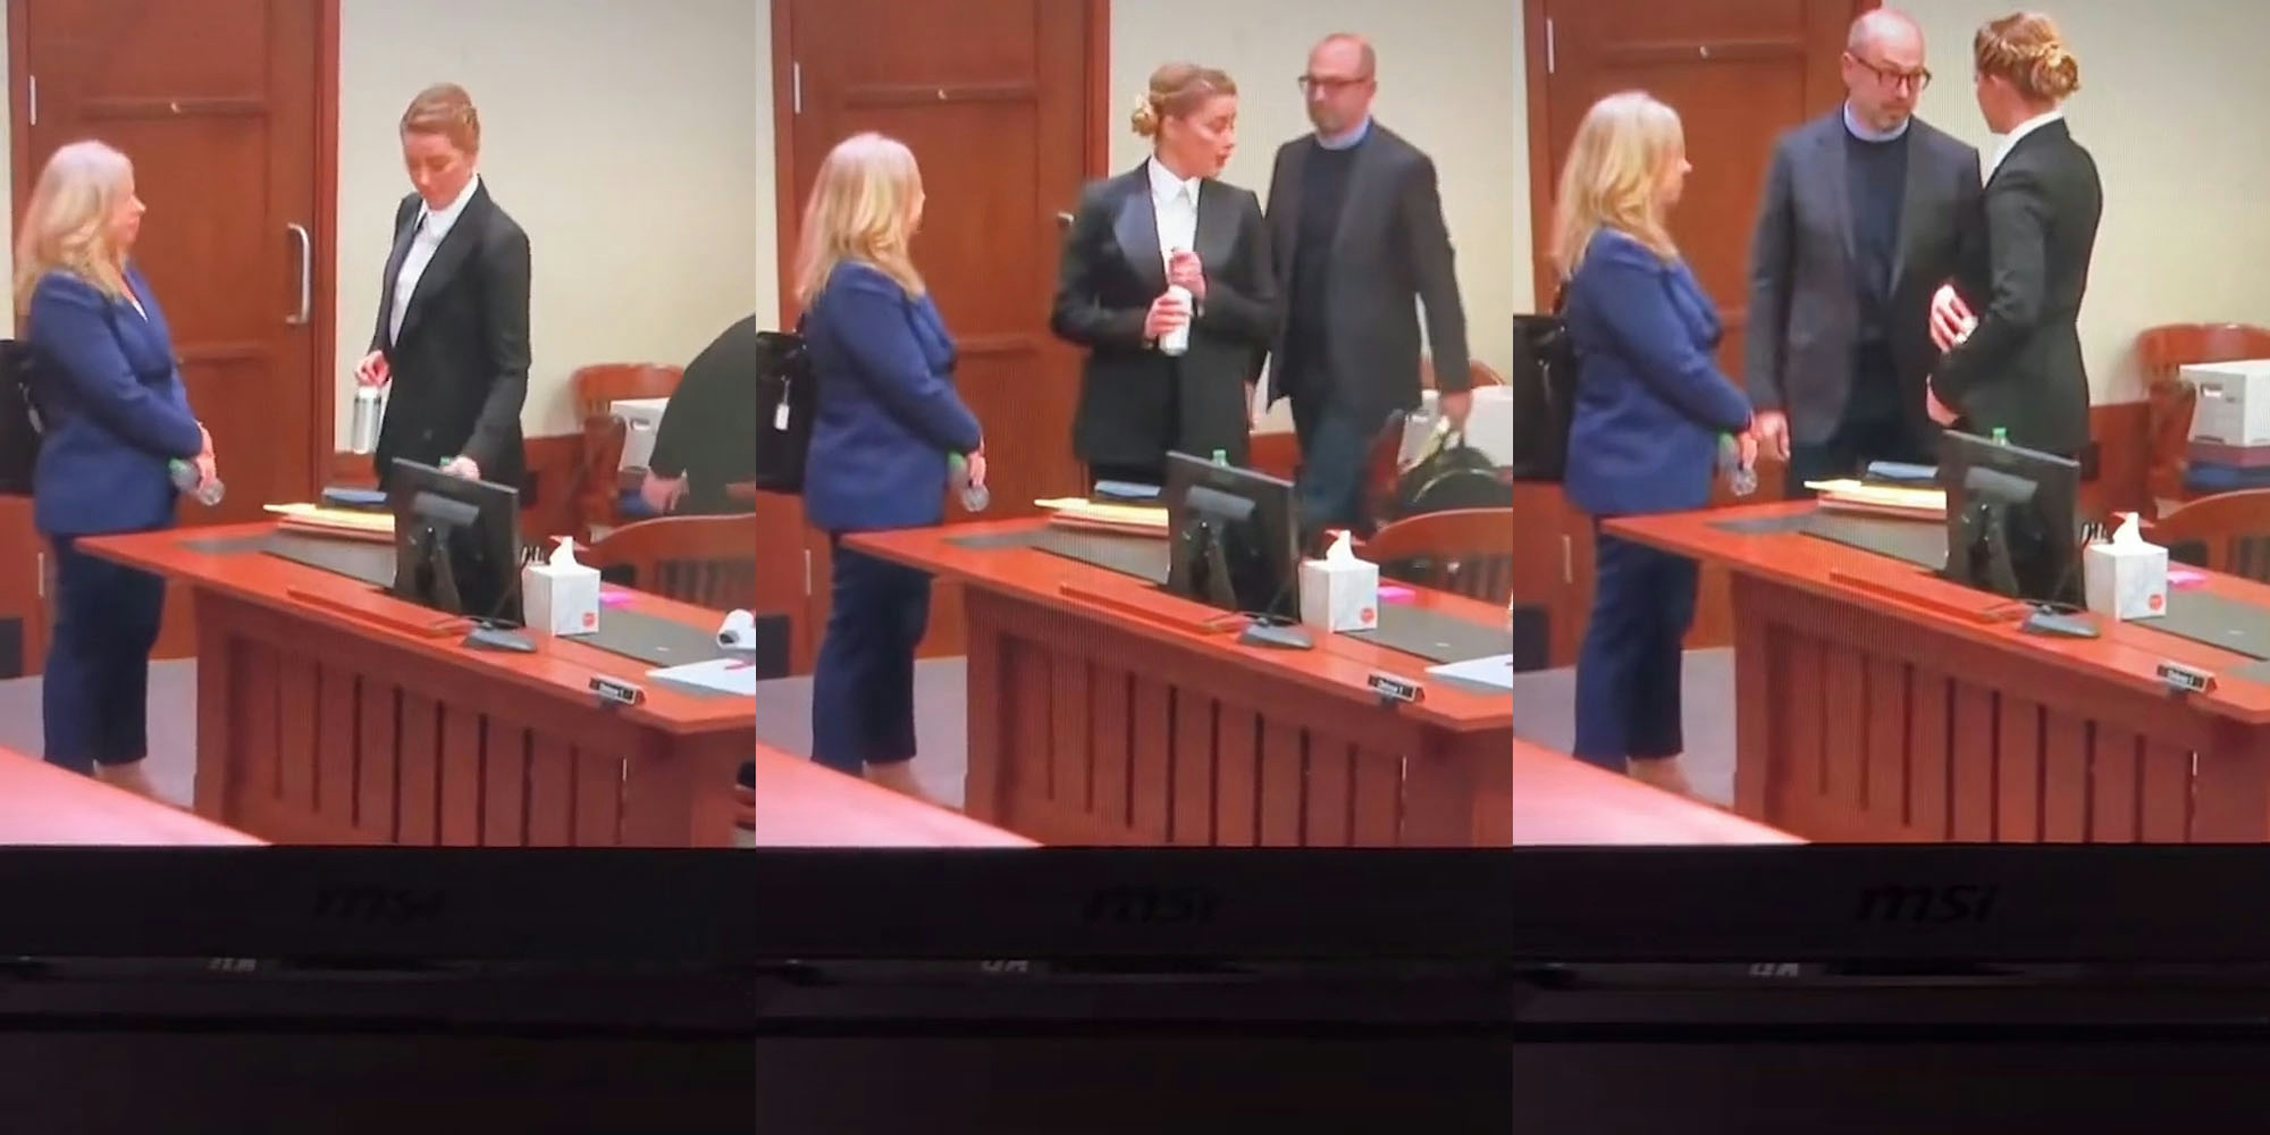 Amber Heard in court holding metal water bottle next to woman in suit (l) Amber Heard holding metal bottle to body looking around room (c) Amber Heard tucking metal bottle in jacket pocket (r)